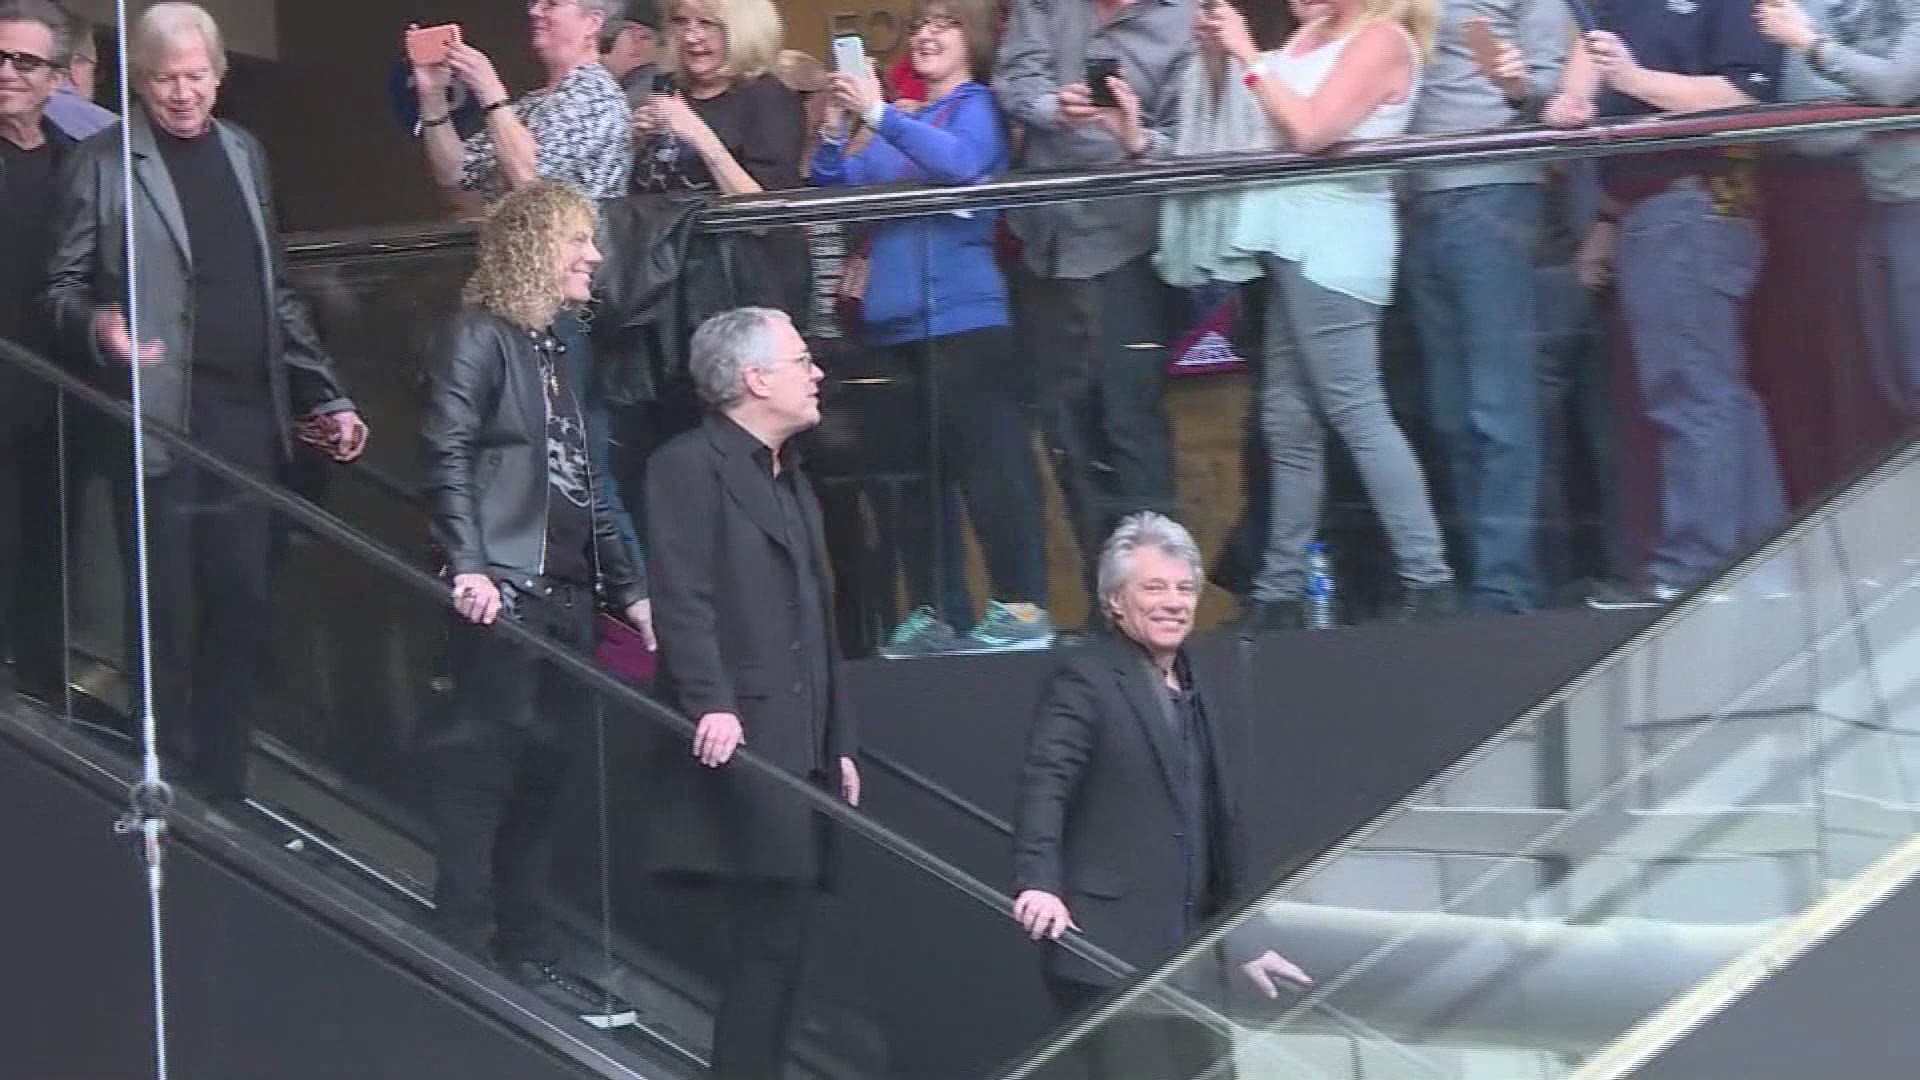 Bon Jovi surprised fans at the Rock Hall on Friday to kick off induction weekend.